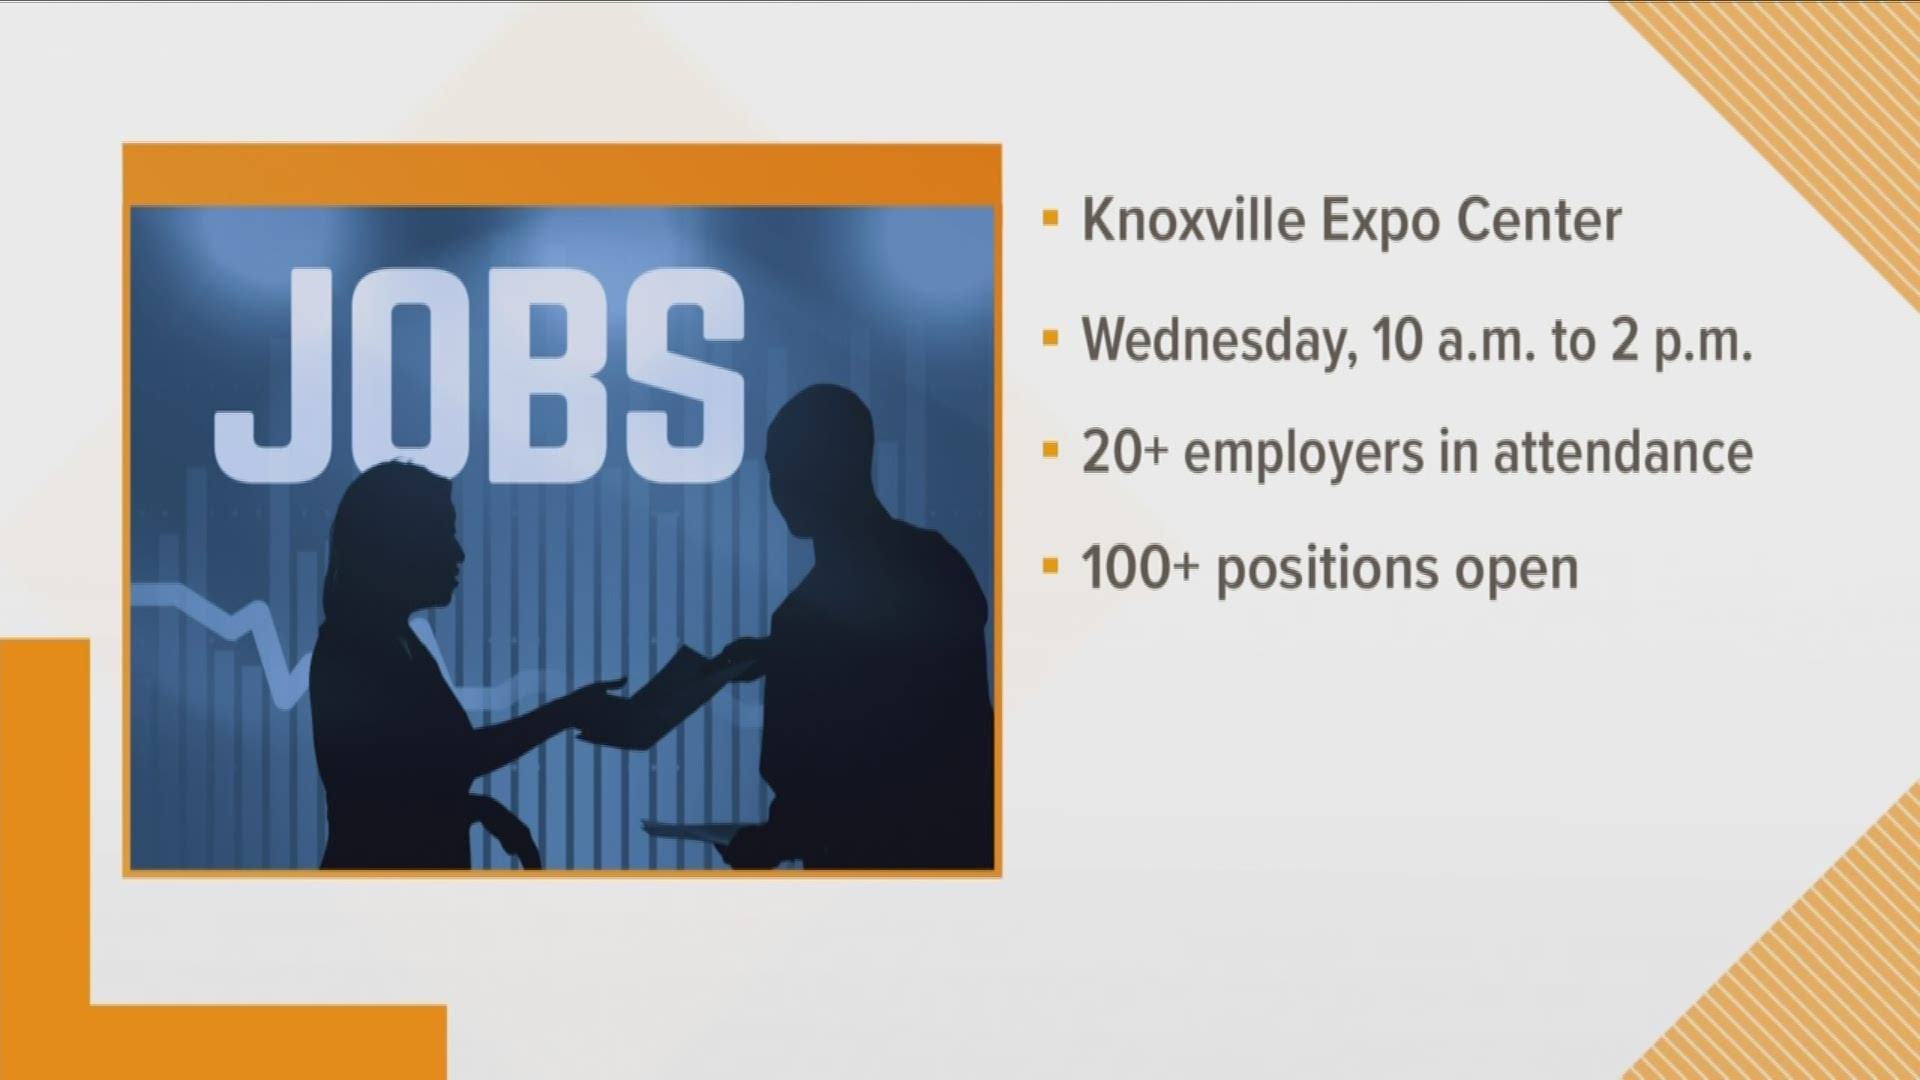 if you're looking for a job... the Knoxville Expo Center is hosting a free job fair Wednesday (2/12) starting at 10 a.m.